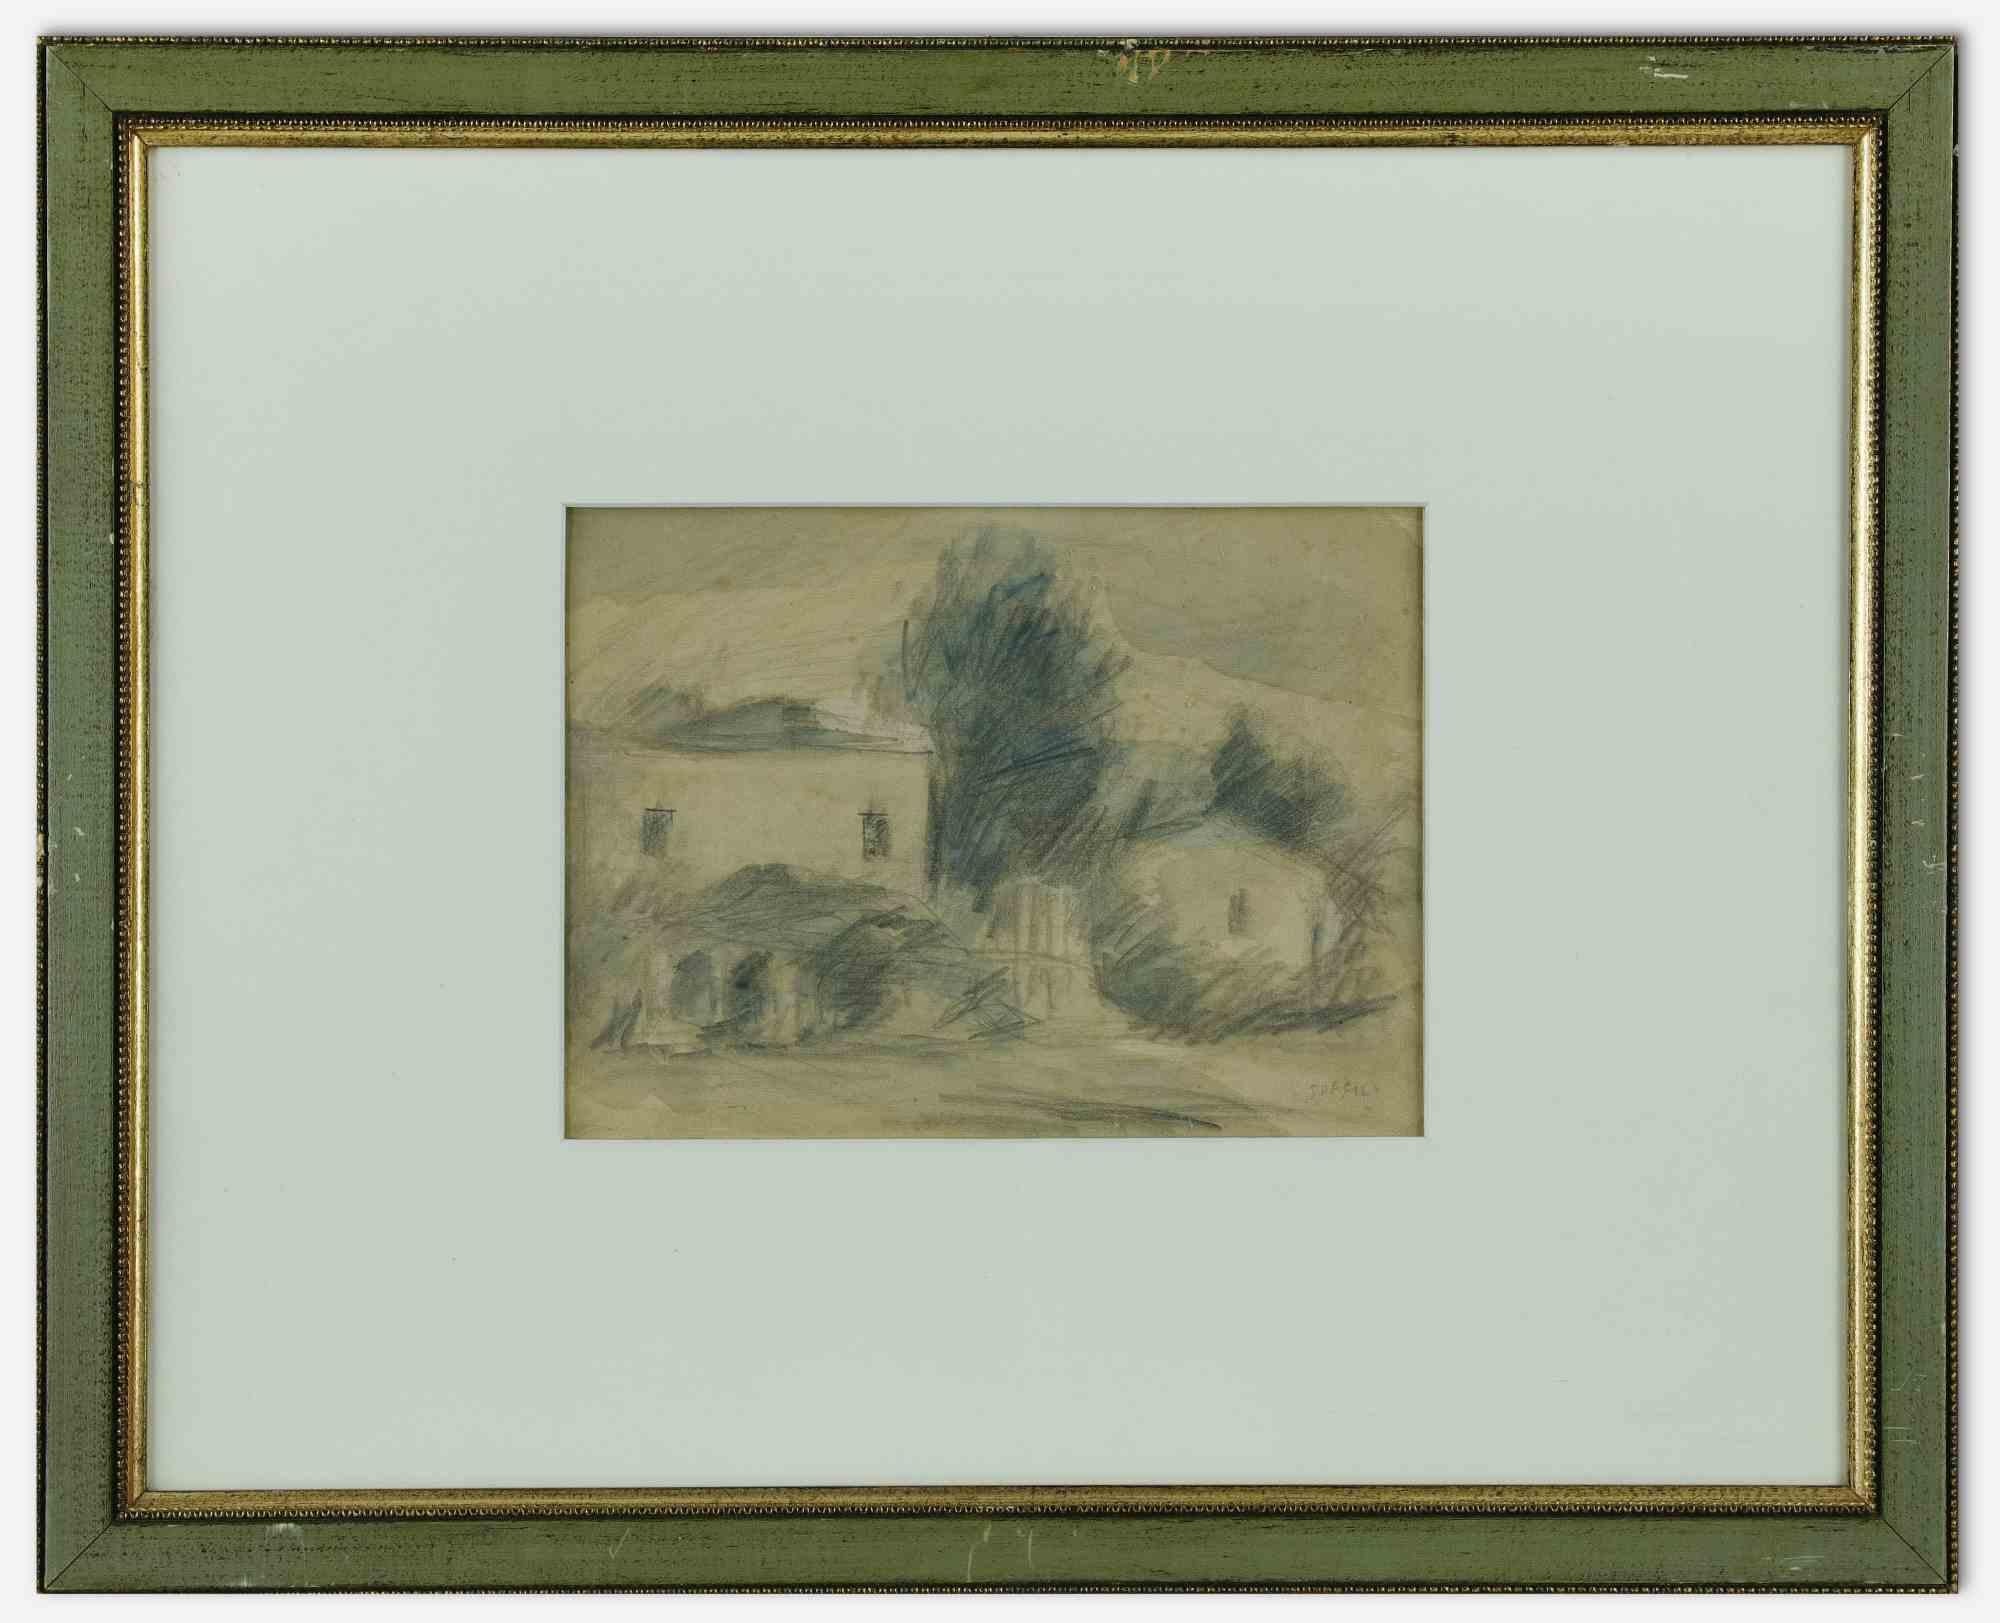 Landscape is an original modern artwork realized by Ardengo Soffici in 1930s.

Pencil on paper.

Hand signed lower right.

Includes frame.